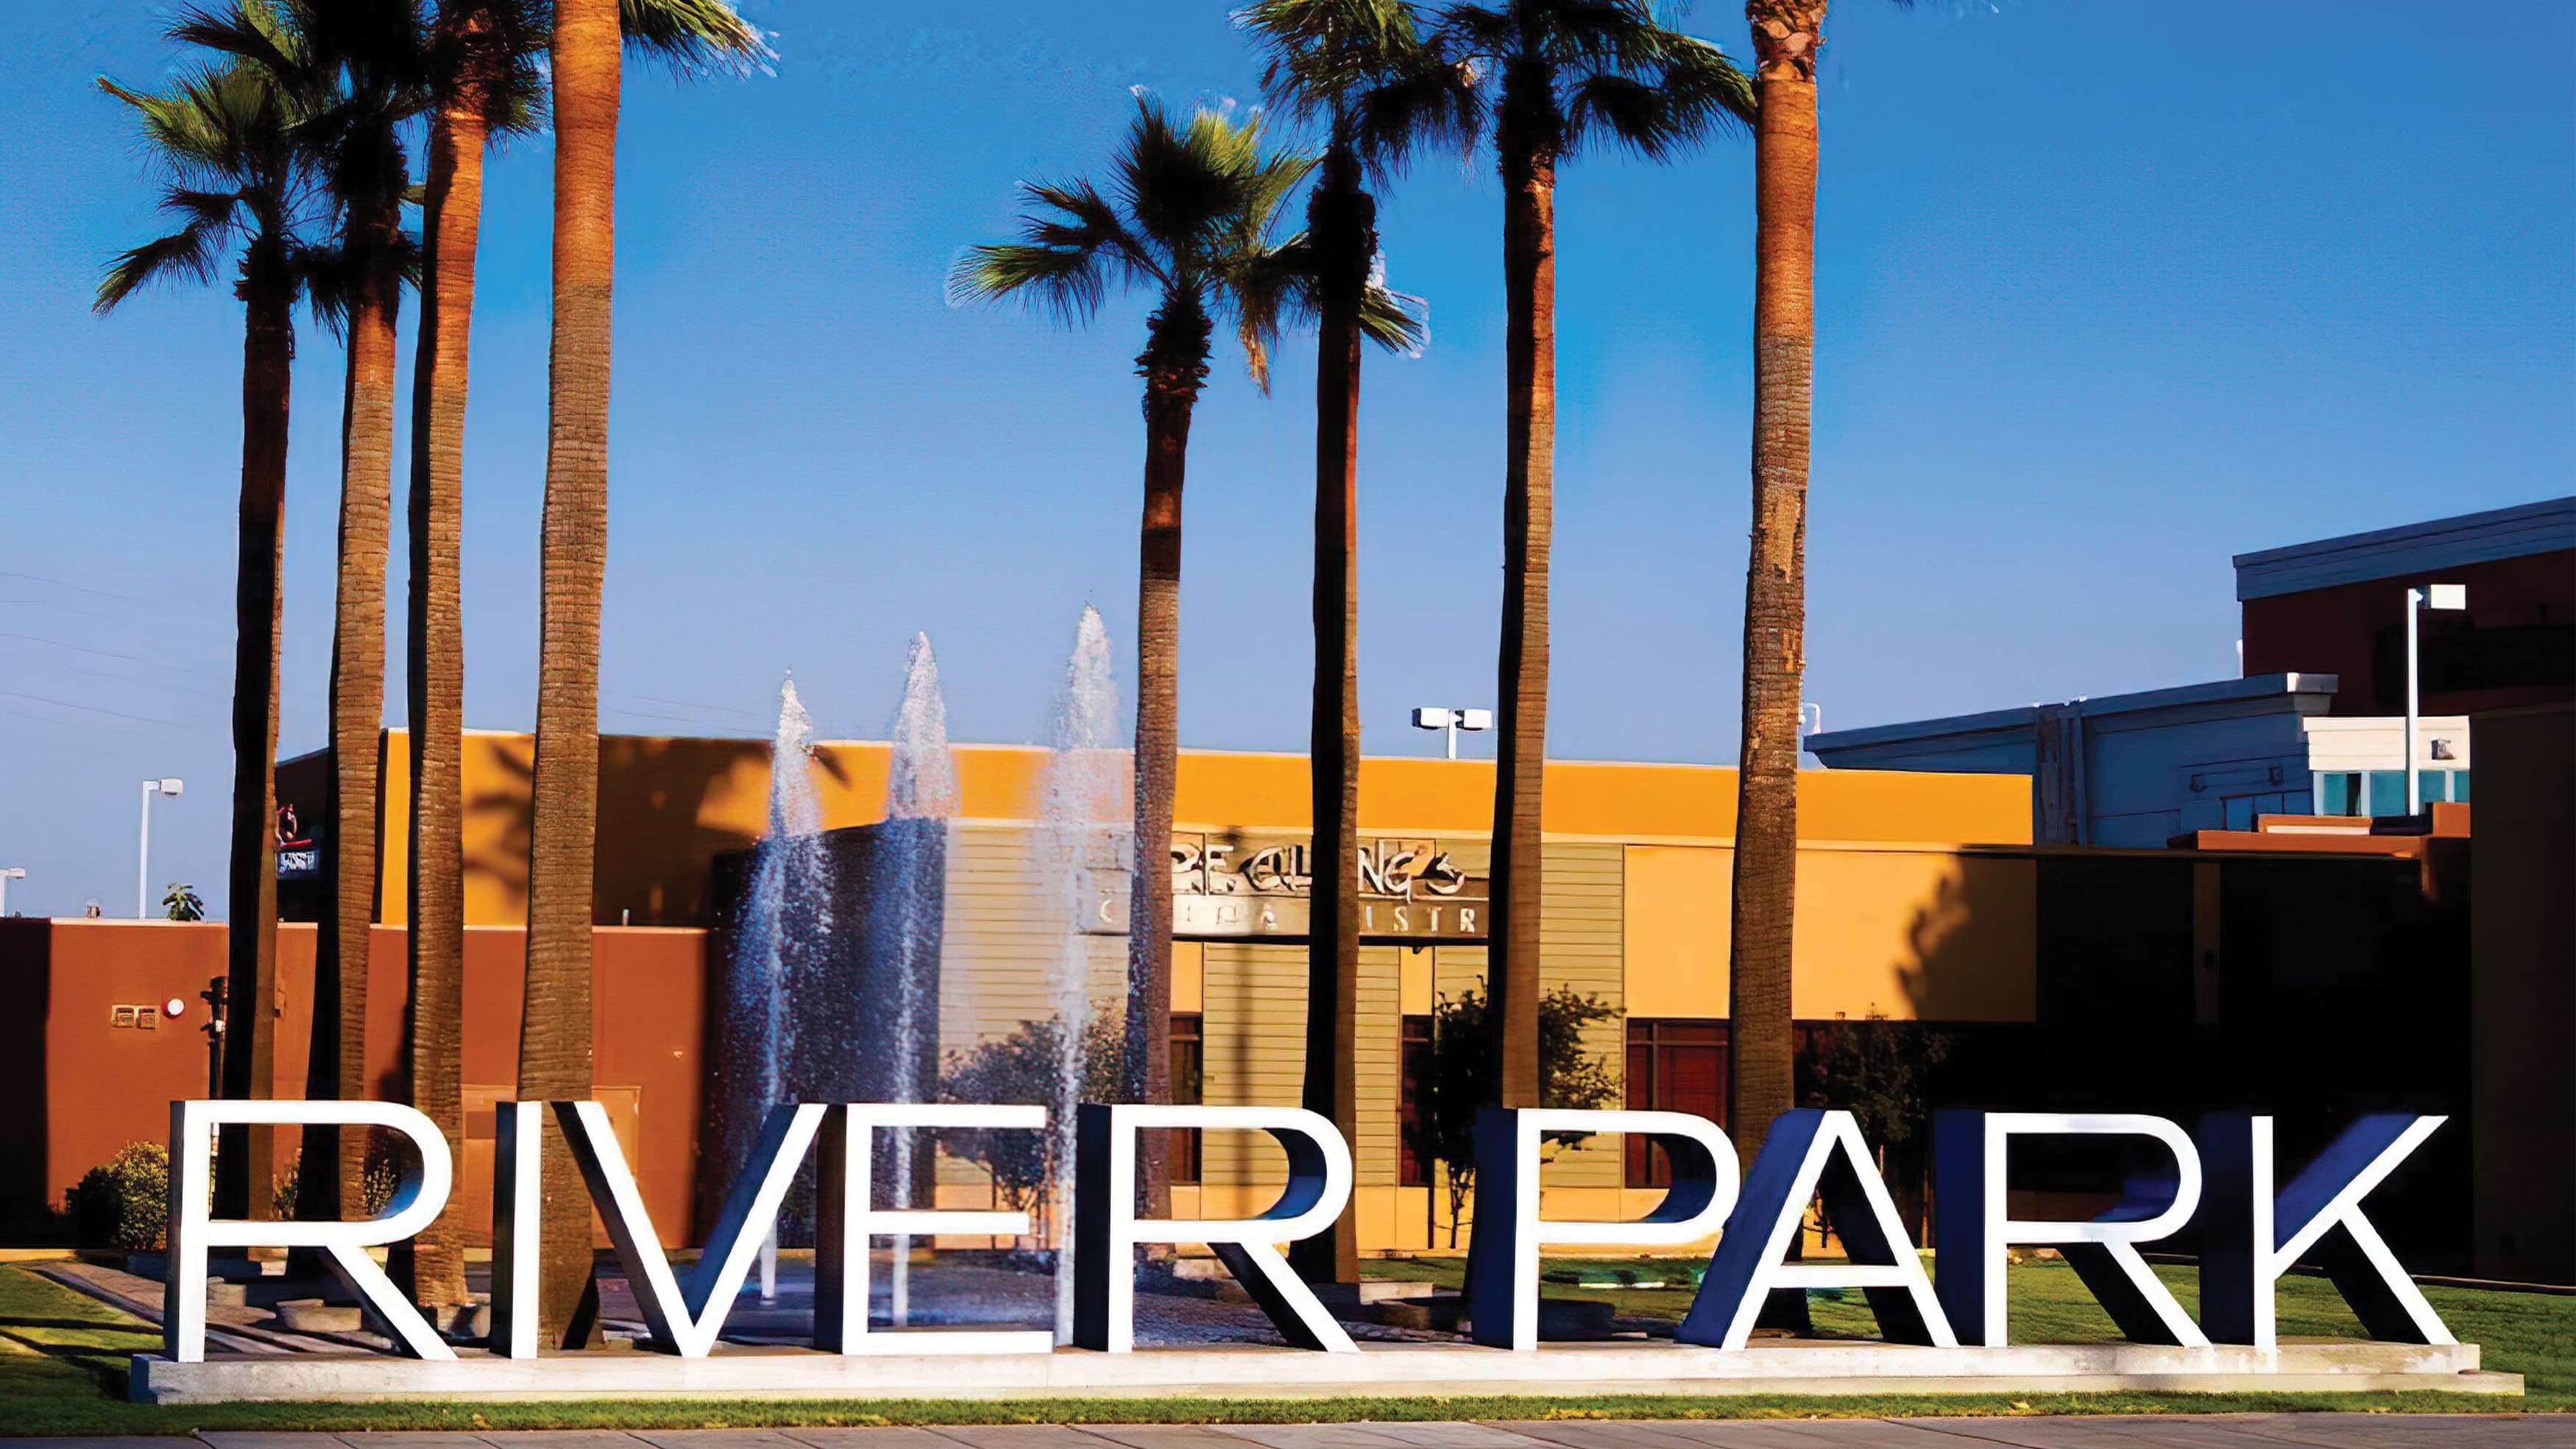 Large, dimensional Riverpark placemaking identity with white face and blue return flanked by a fountain and palm trees